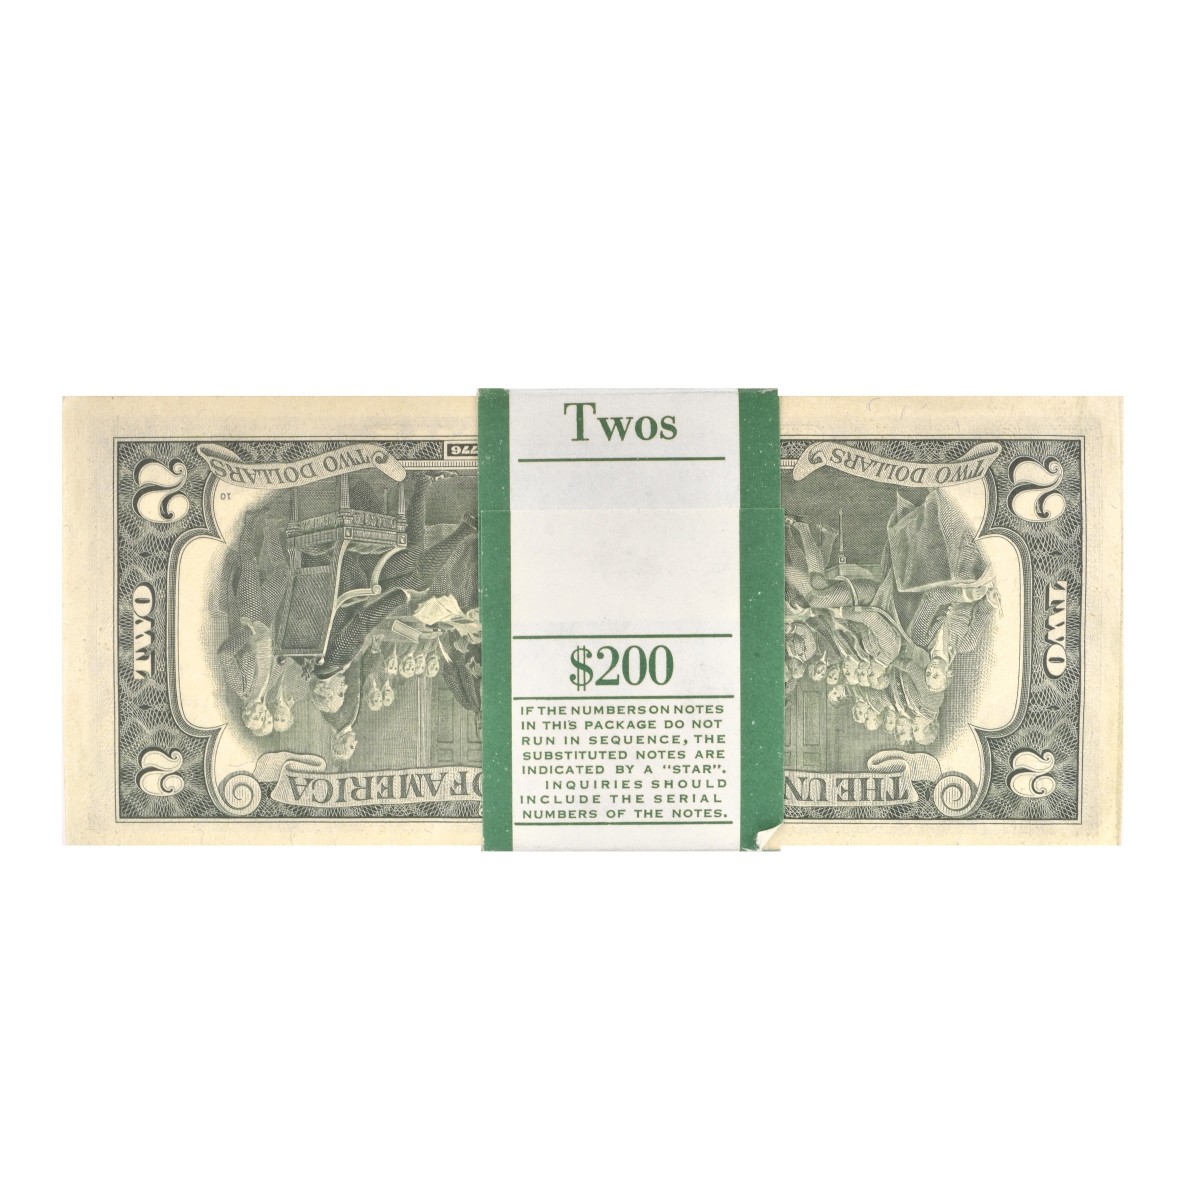 (113) US 1976 $2.00 Paper Currency